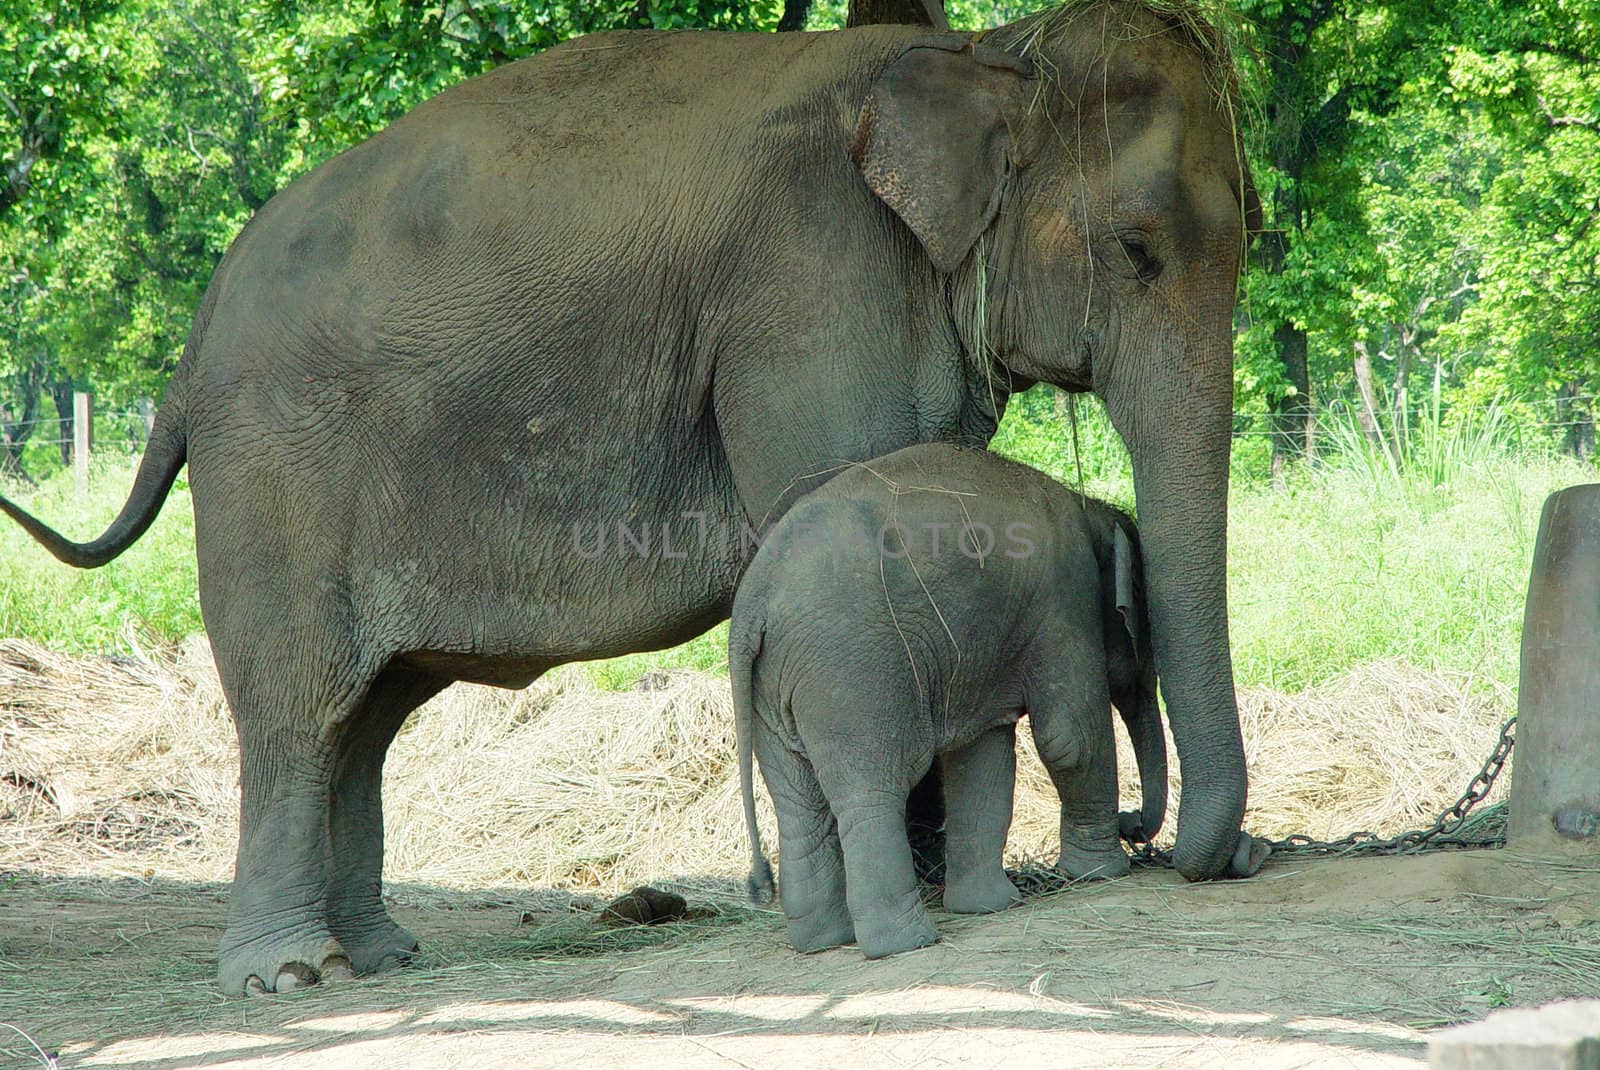 Mother and baby elephant in the Chitwan National Park, Nepal